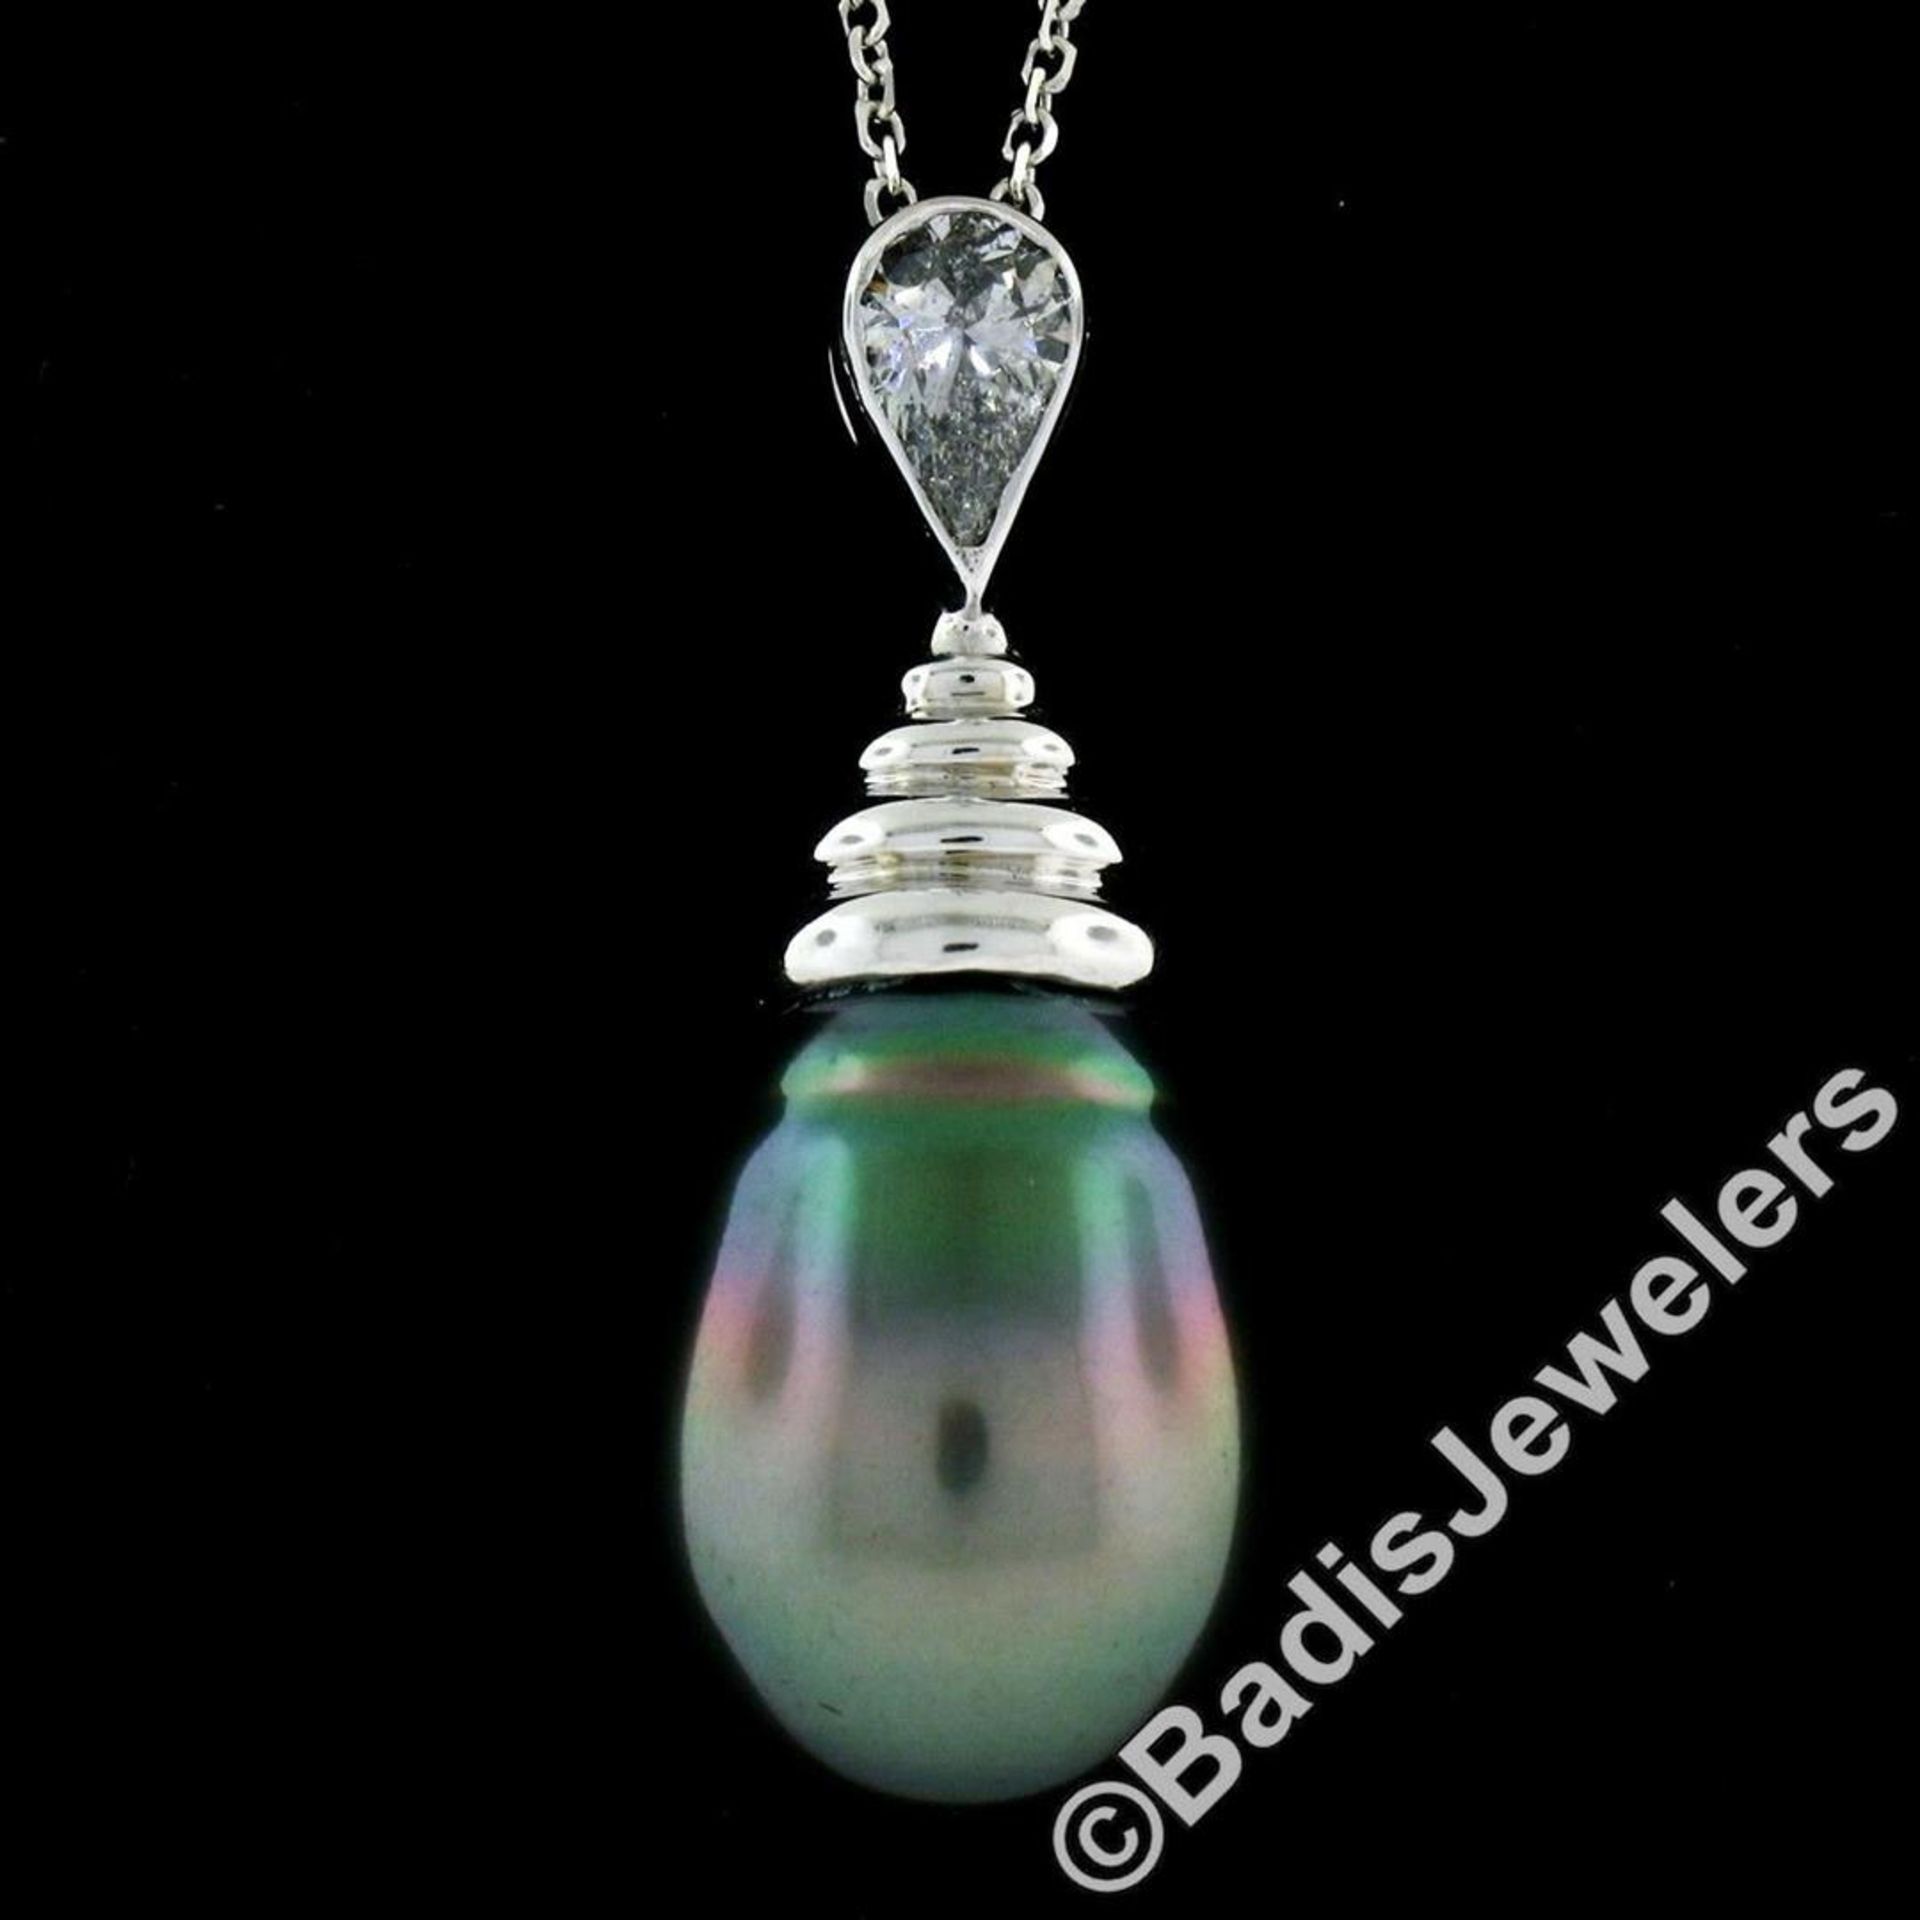 18kt White Gold Tahitian Black Pearl and 0.60 ct Diamond Pendant Necklace - Image 2 of 7